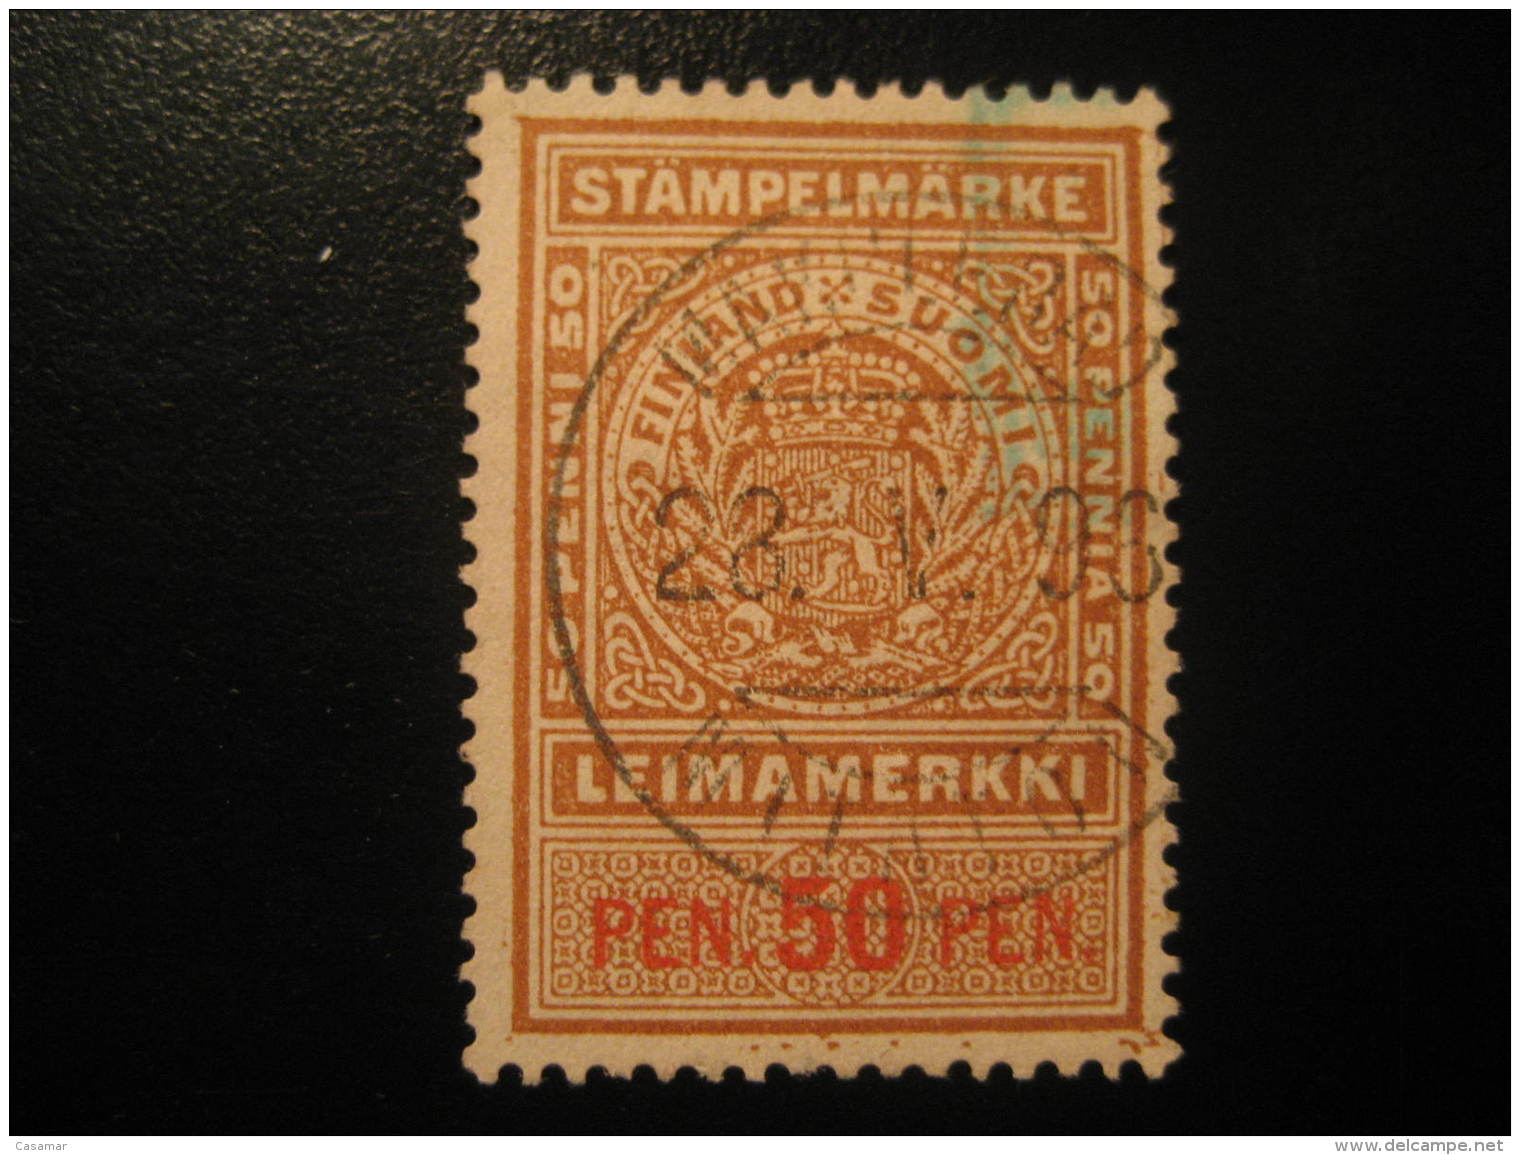 1896 STAMPELMARKE 50 Pen Revenue Fiscal Tax Postage Due Official FINLAND - Revenue Stamps